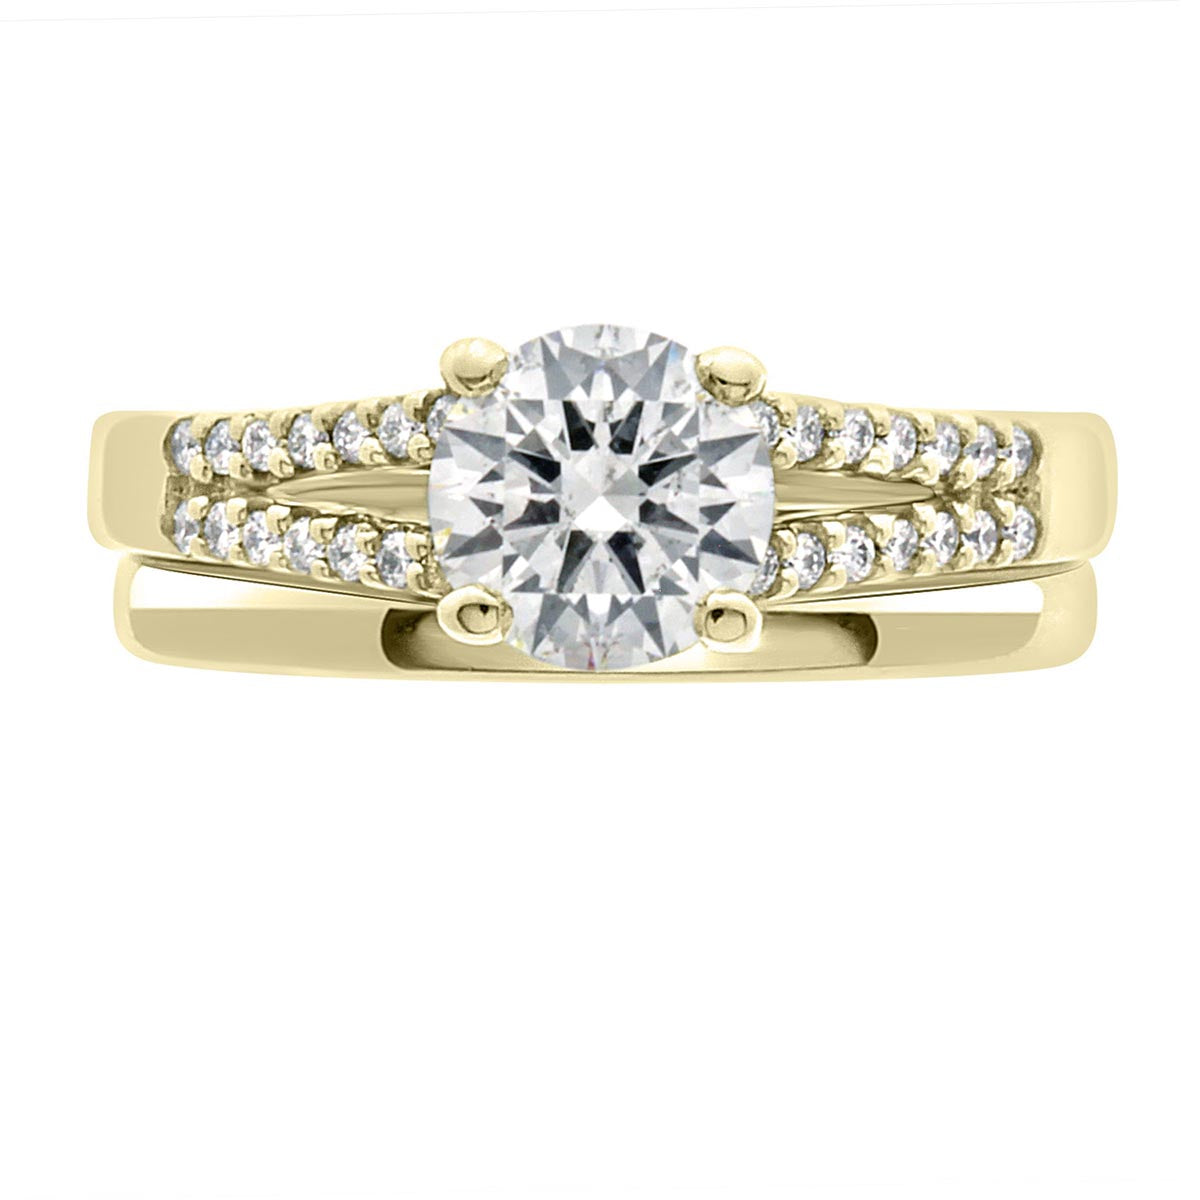 Round Diamond With Split Band made from yellow gold with a plain wedding ring